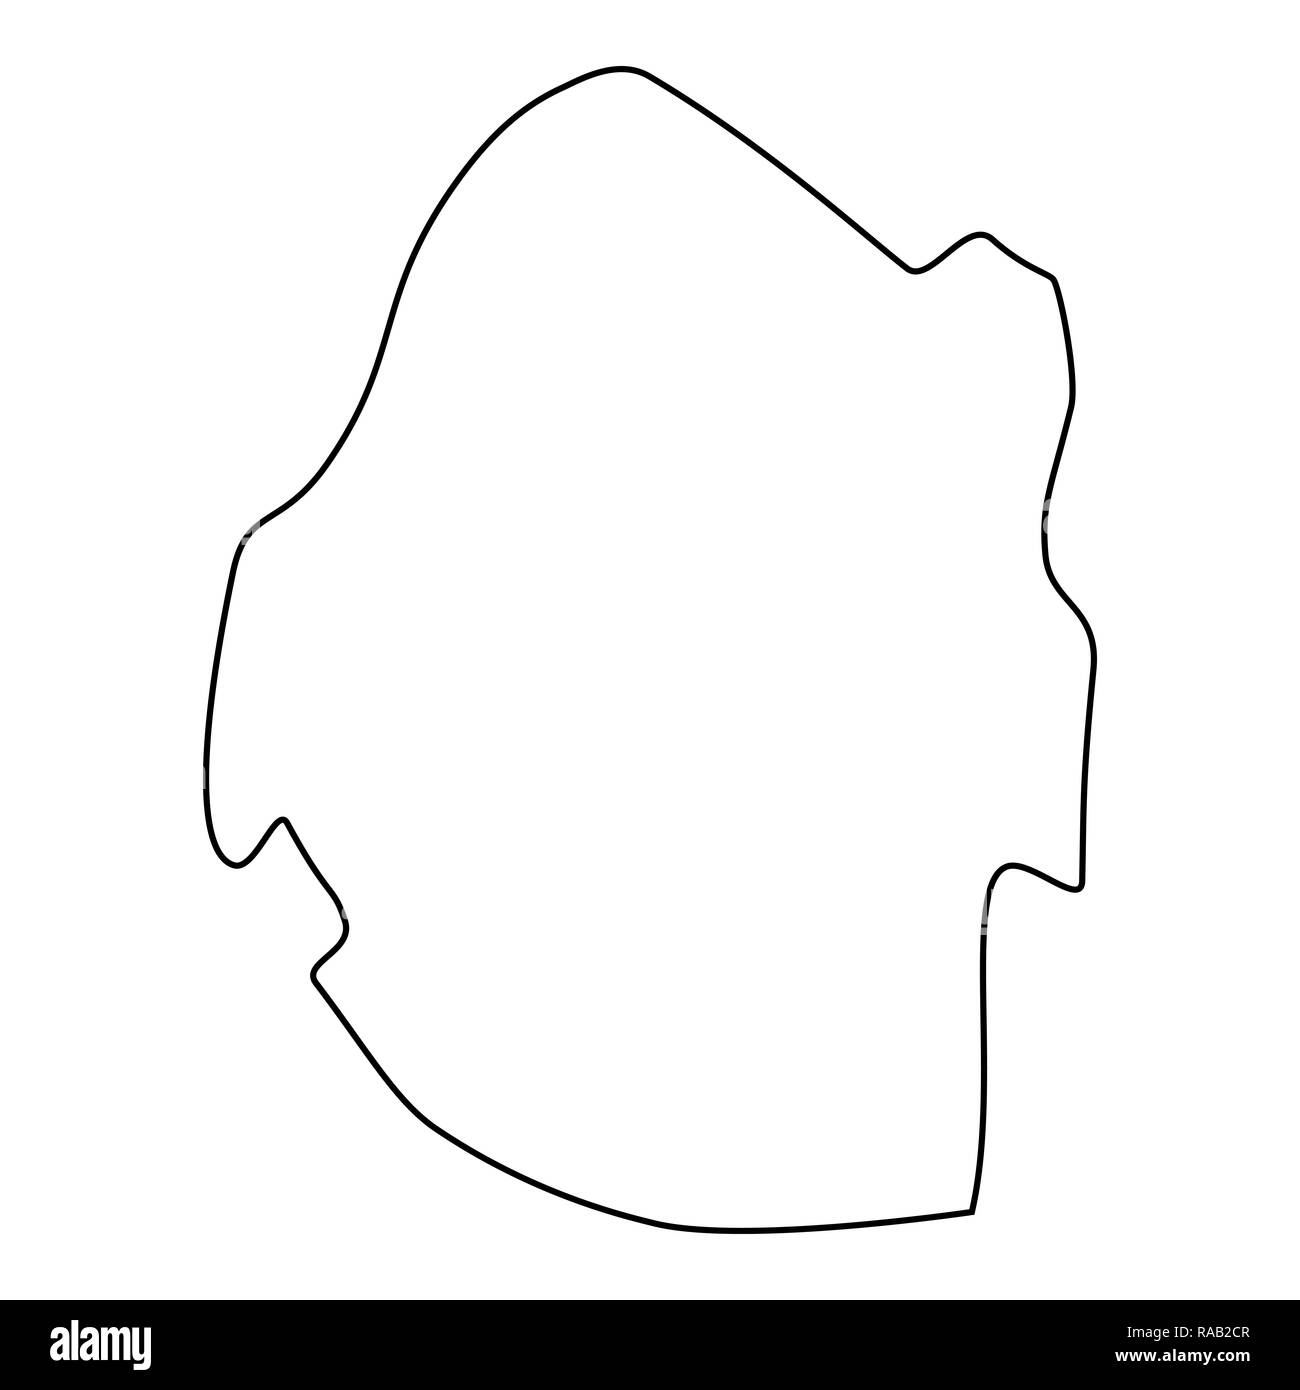 map of Swaziland - outline. Silhouette of Swaziland map  illustration Stock Photo